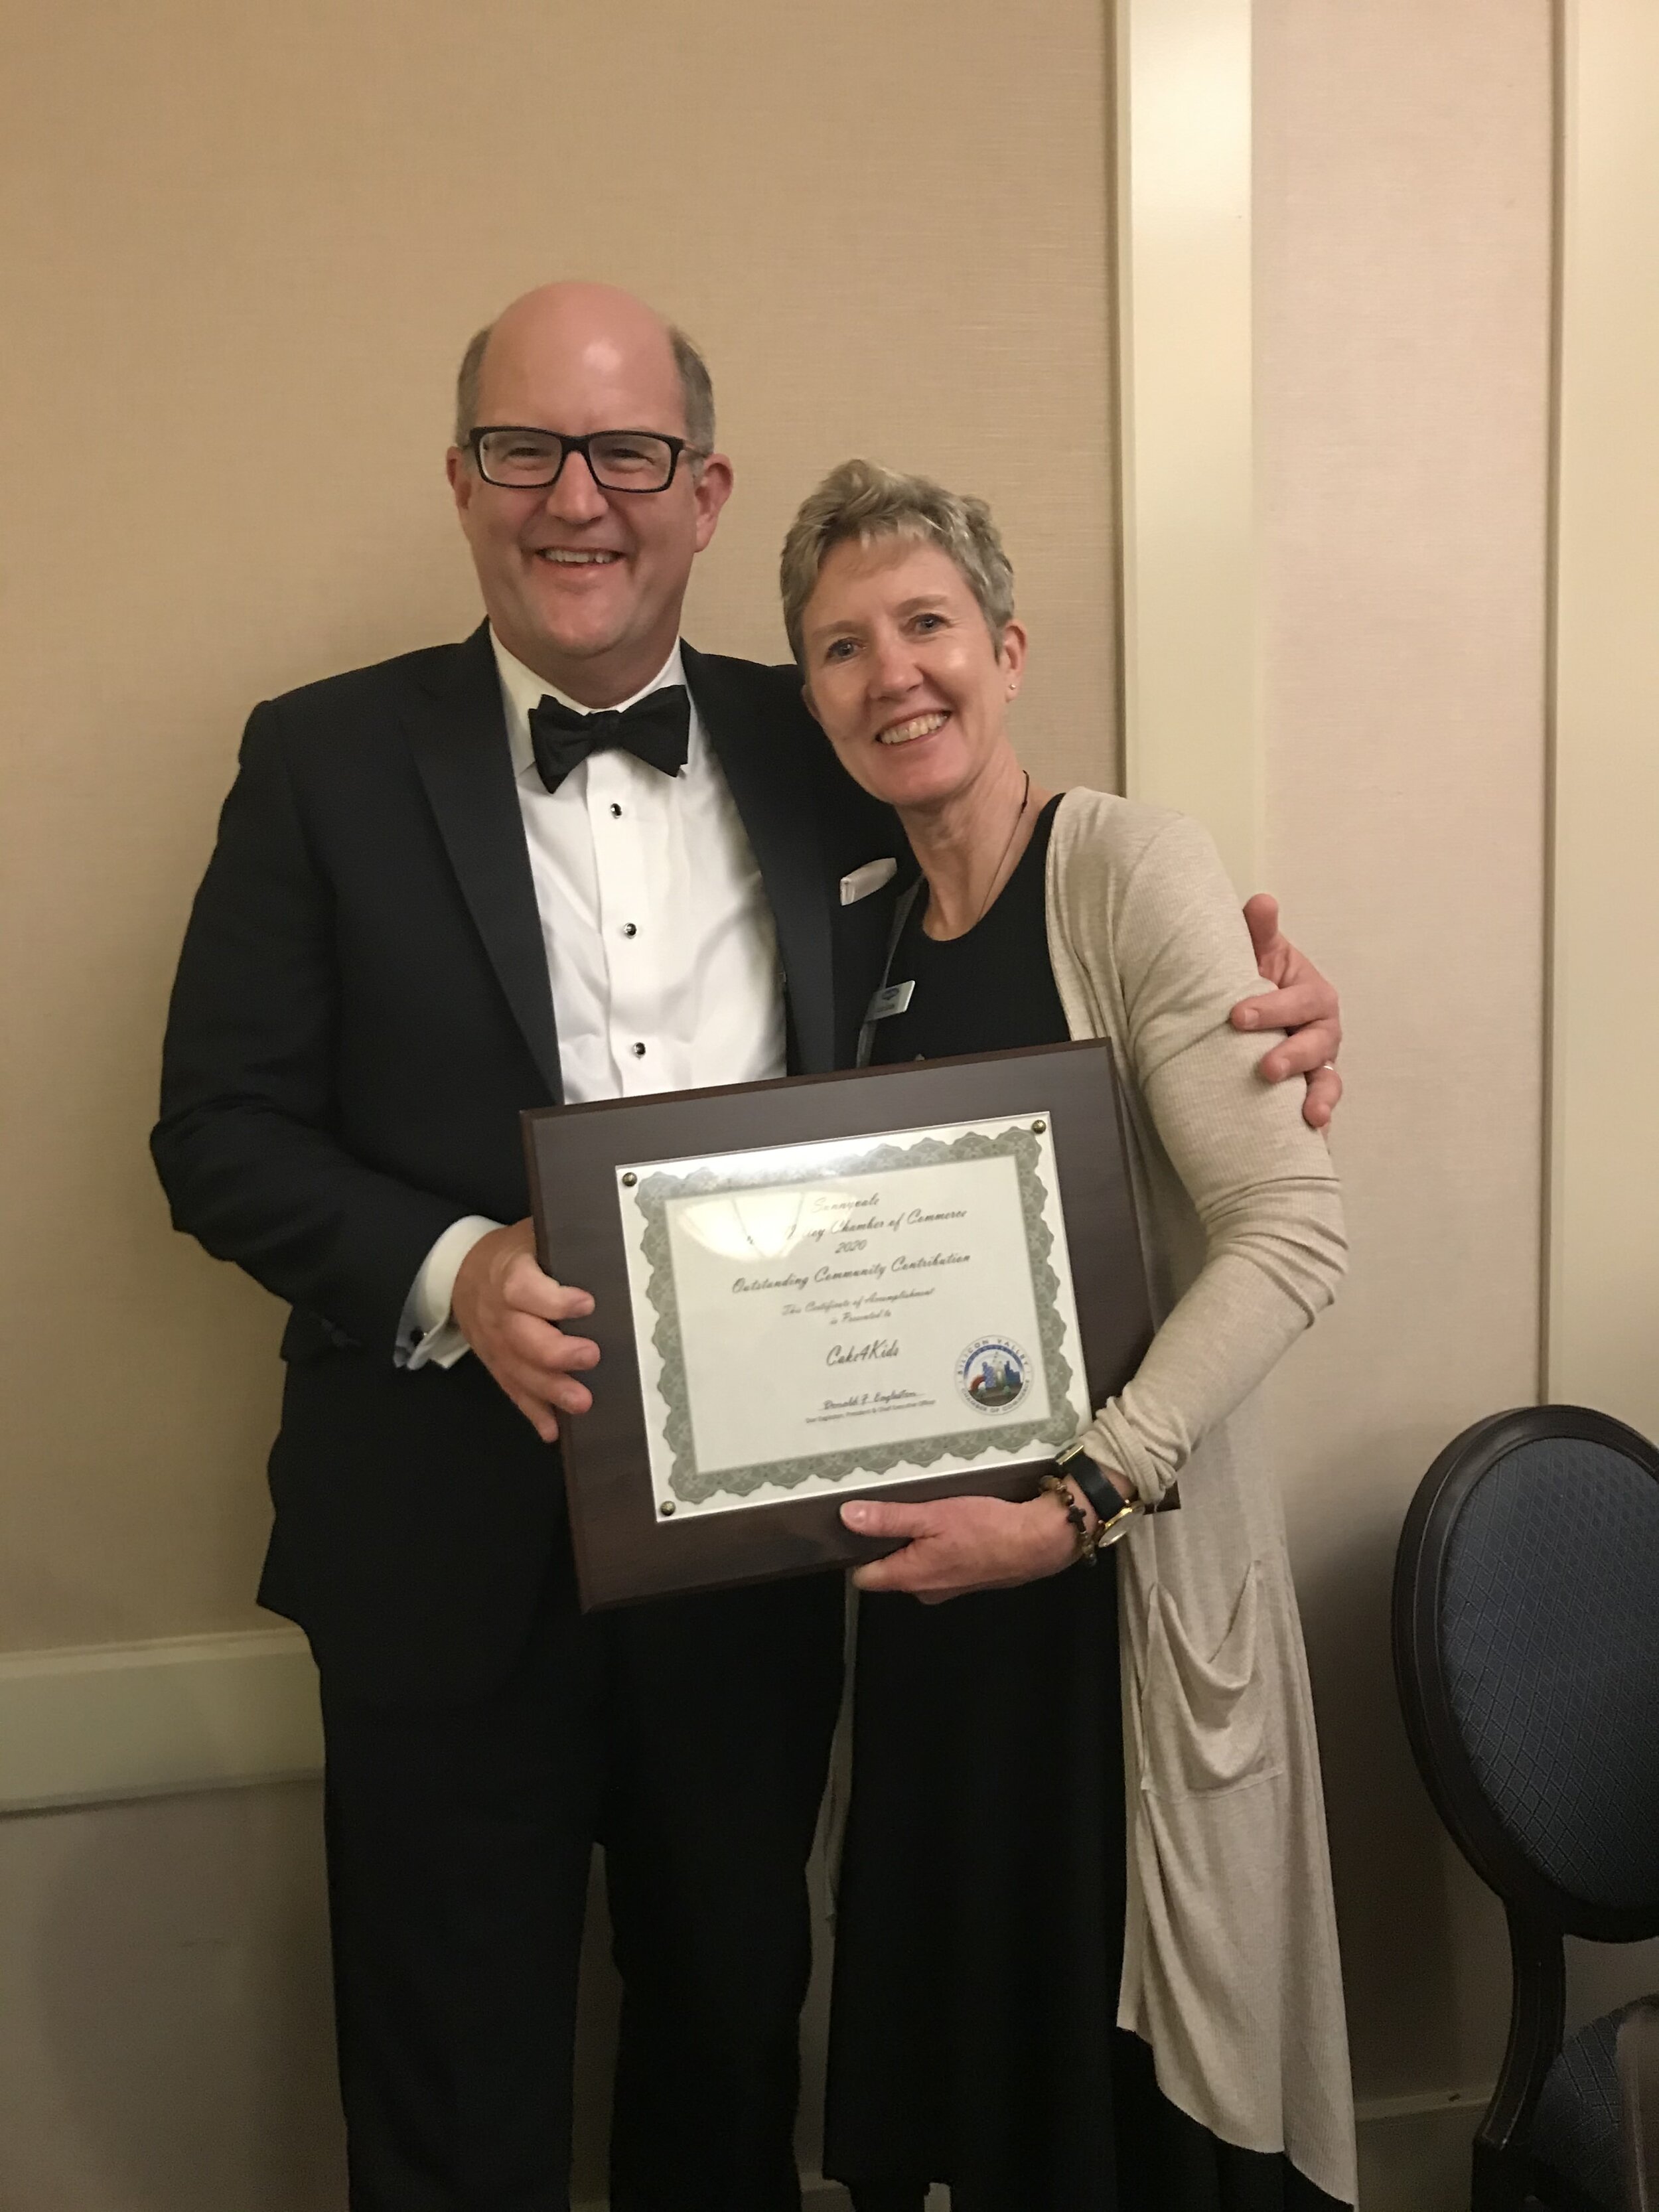  Russ Melton (Councilmember) and Julie Eades (Cake4Kids Executive Director) at the 55th Annual Murphy Awards Dinner on February 22, 2020 in Sunnyvale, CA 